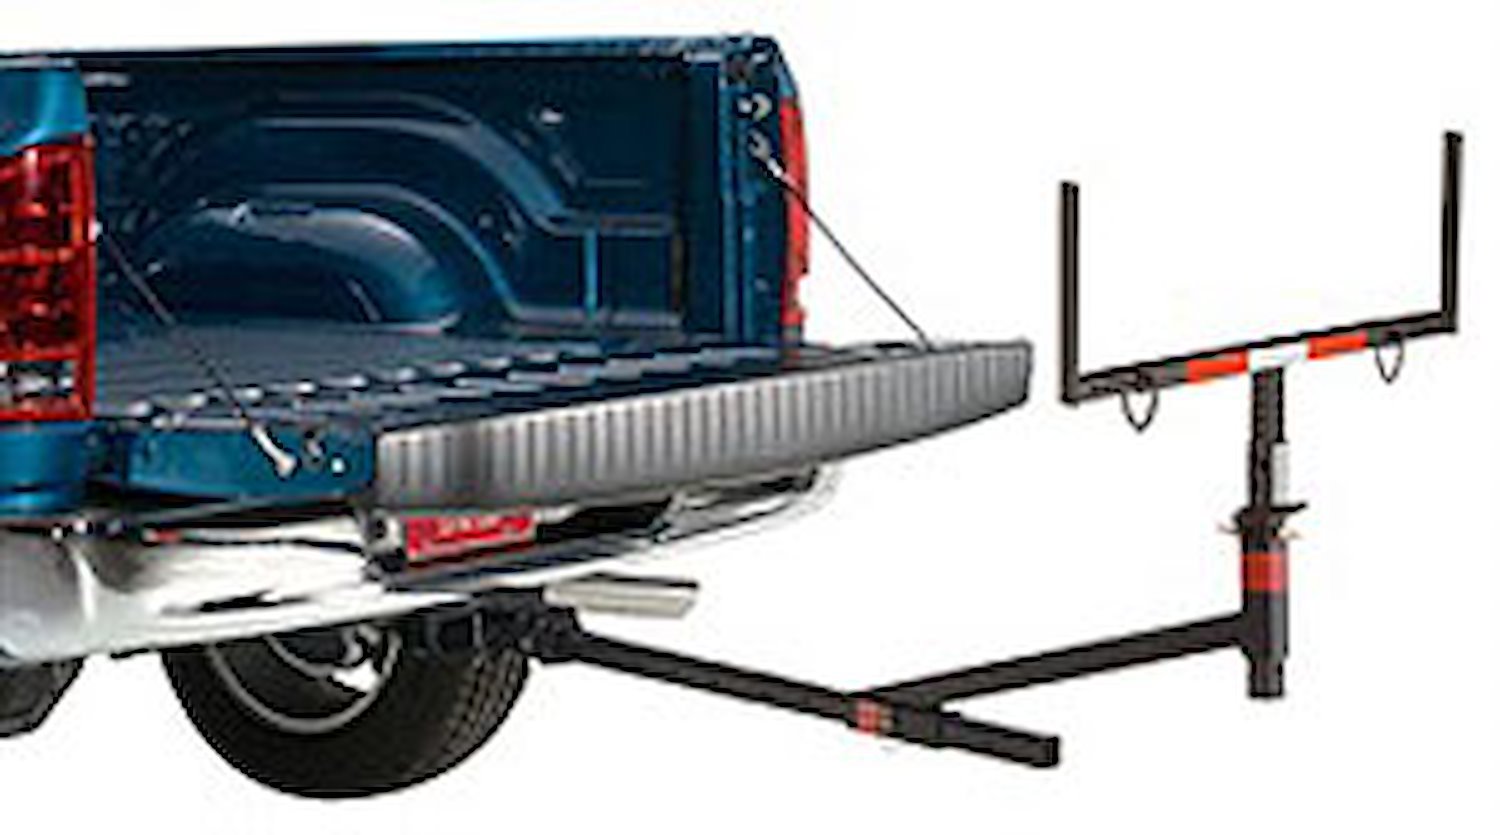 Hitch Rack Truck Bed Extender Adjustable from 27